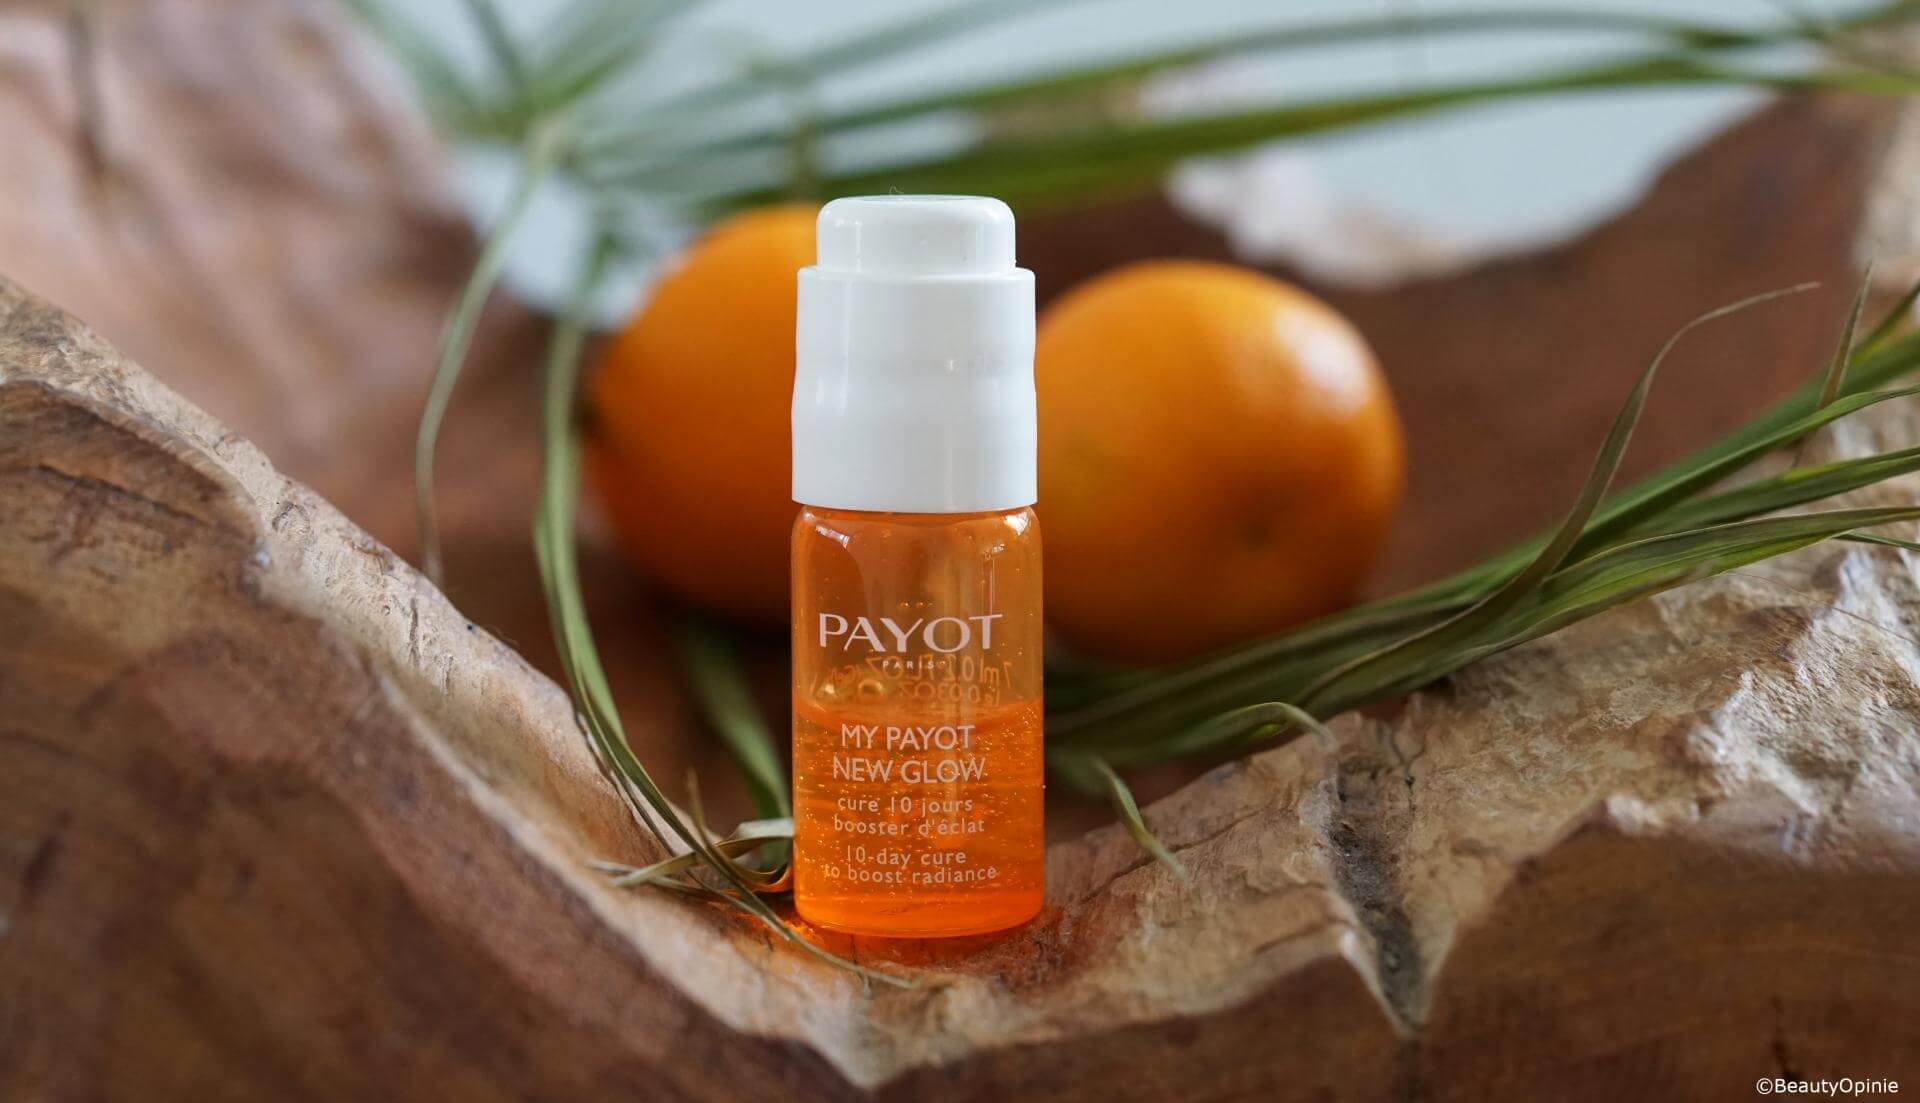 My Payot New Glow review